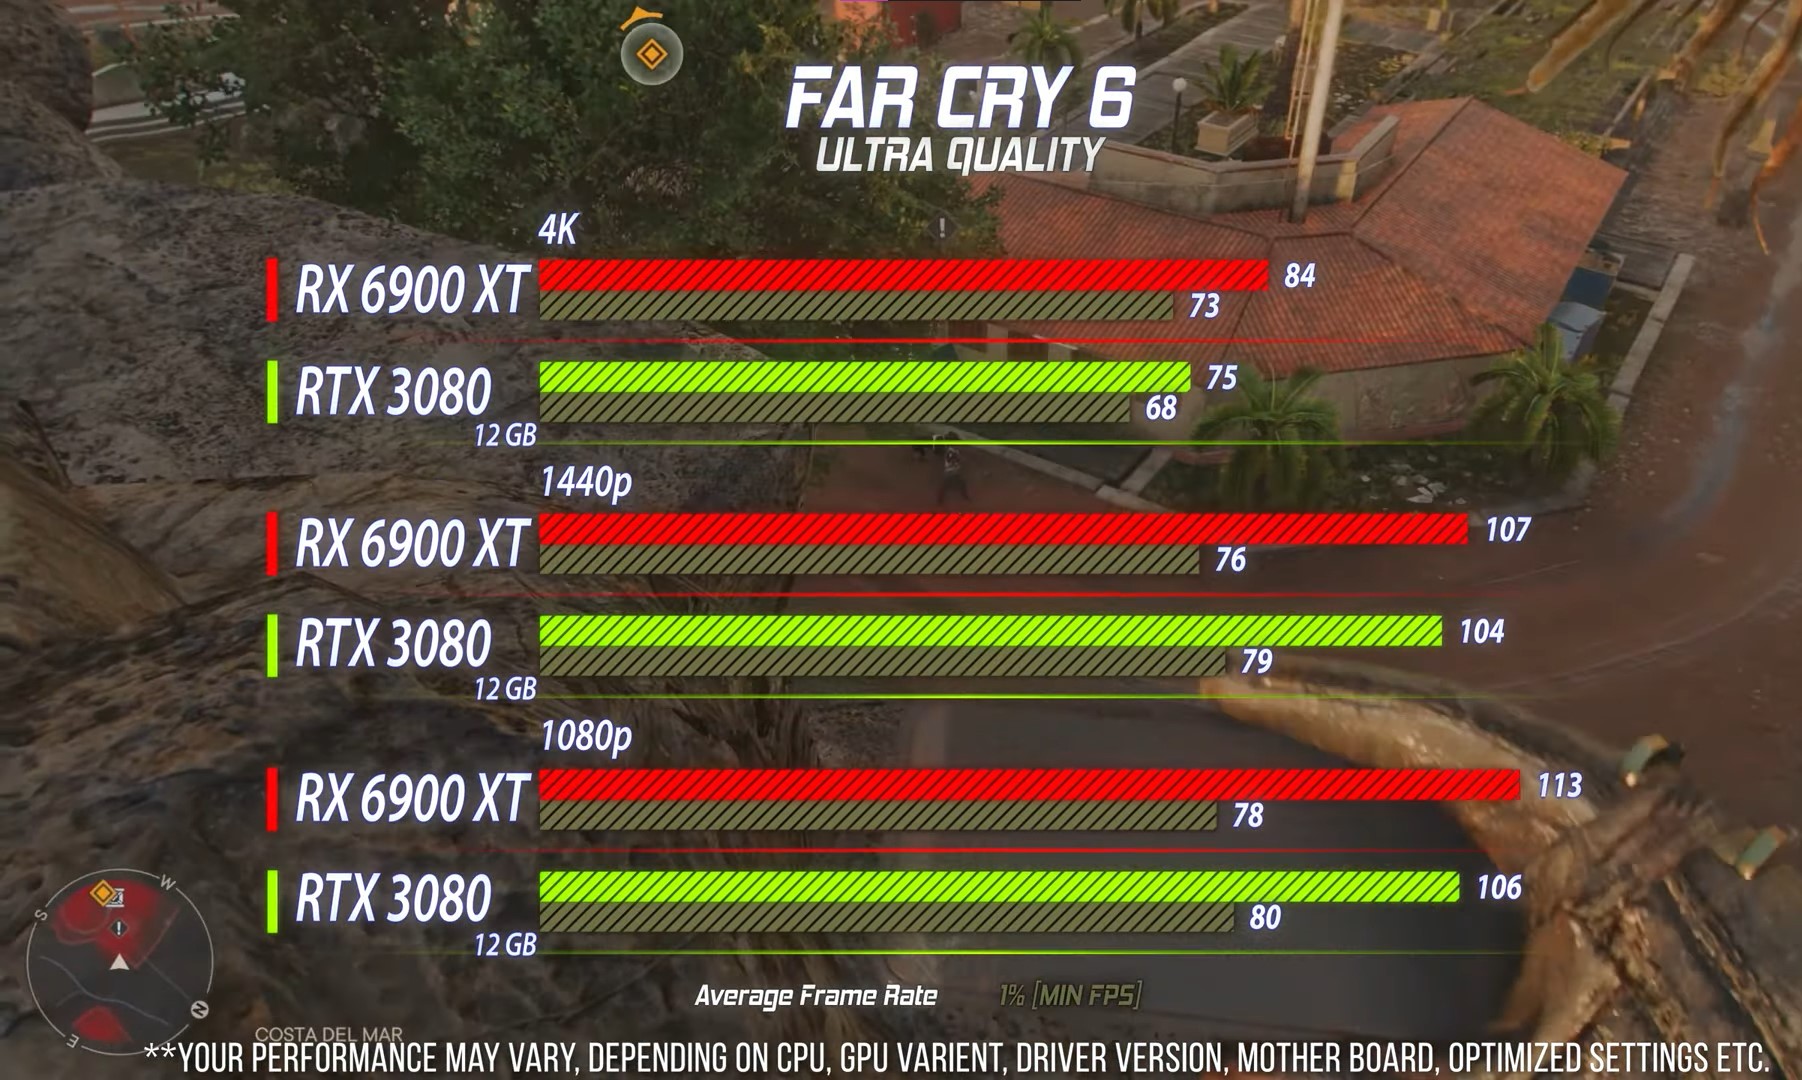 Far Cry 6 Benchmarks on 1080p, 1440p, and 4K